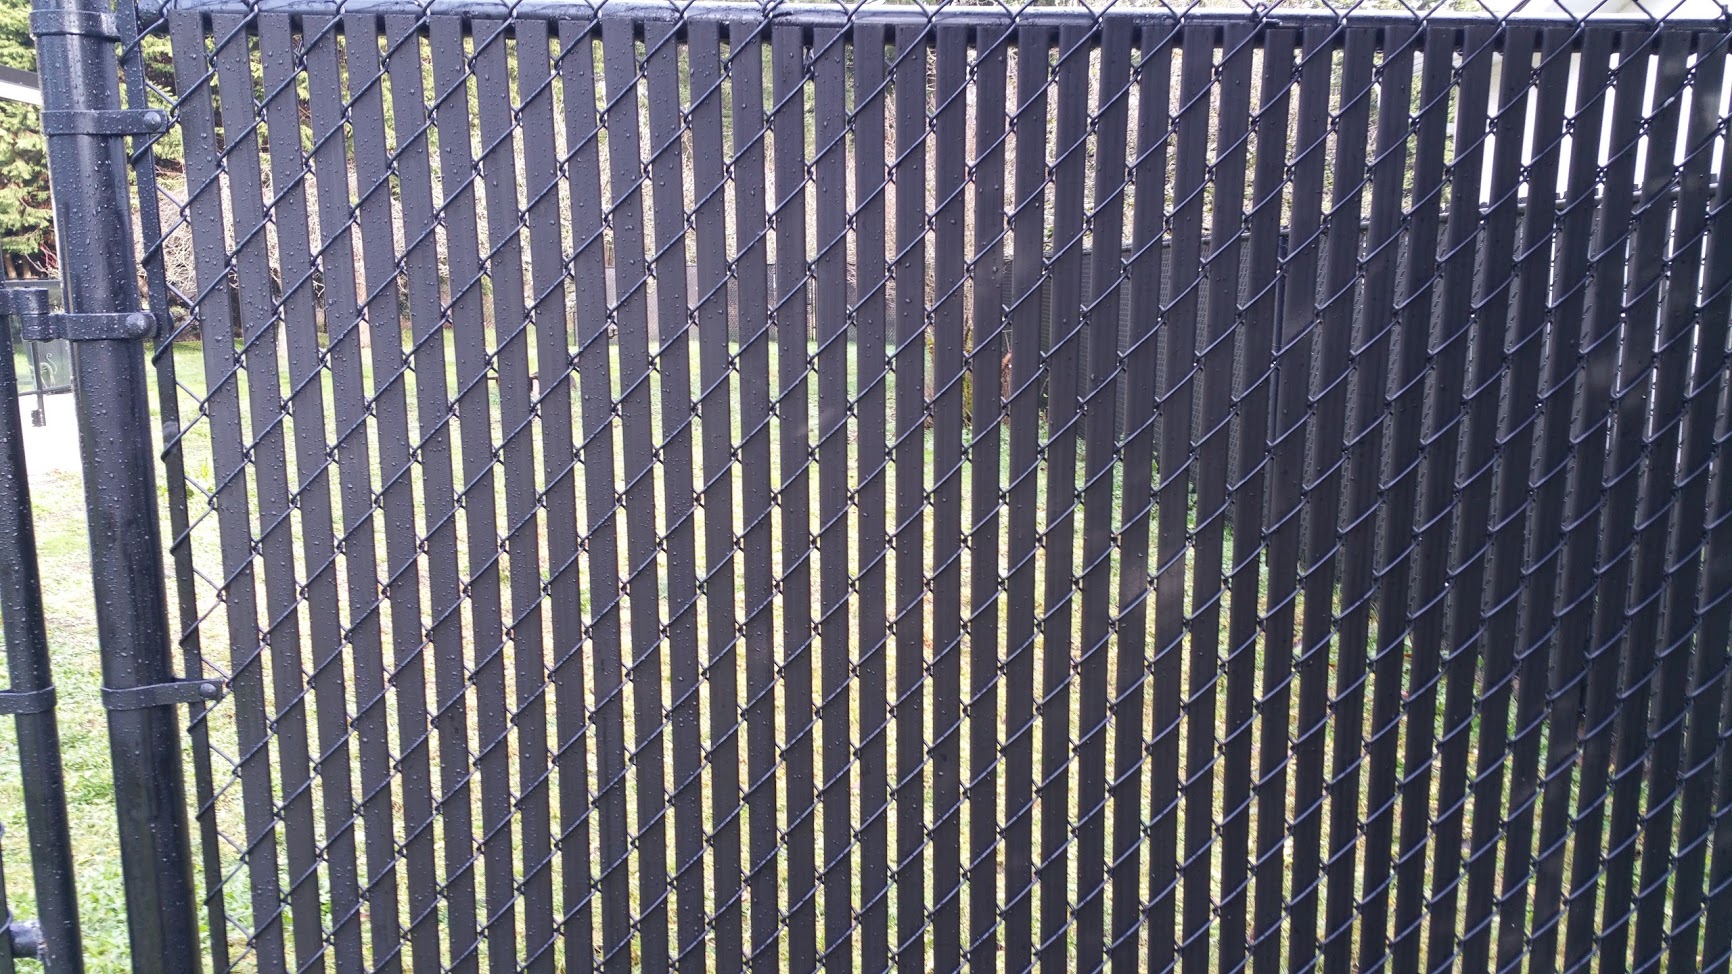 Chain link with privacy slats